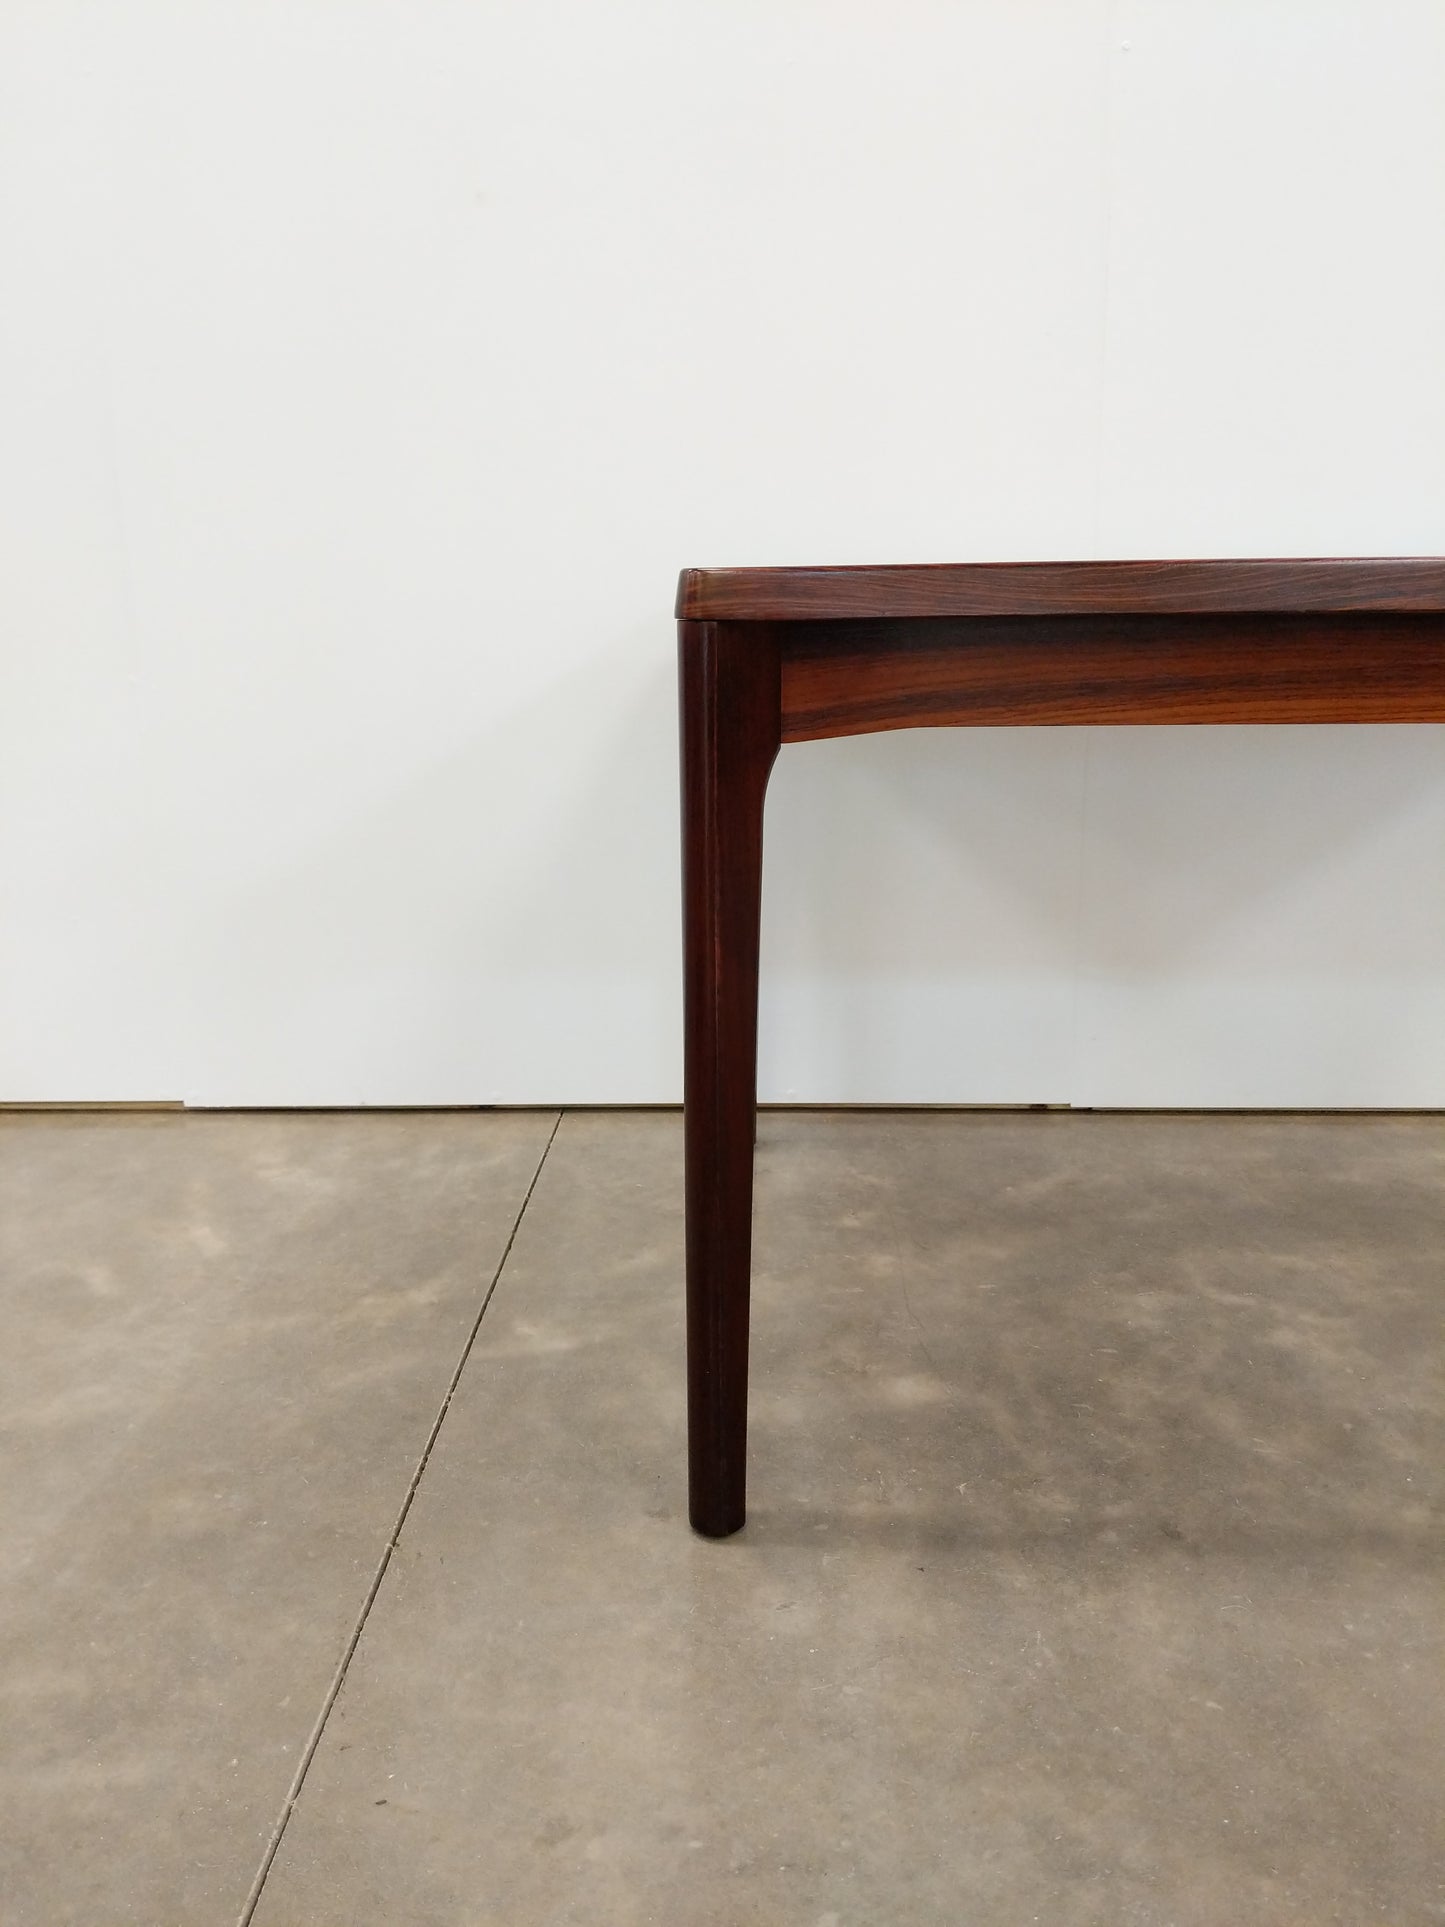 Vintage Danish Modern Rosewood Extendable Dining Table by Henning Kjaernulf